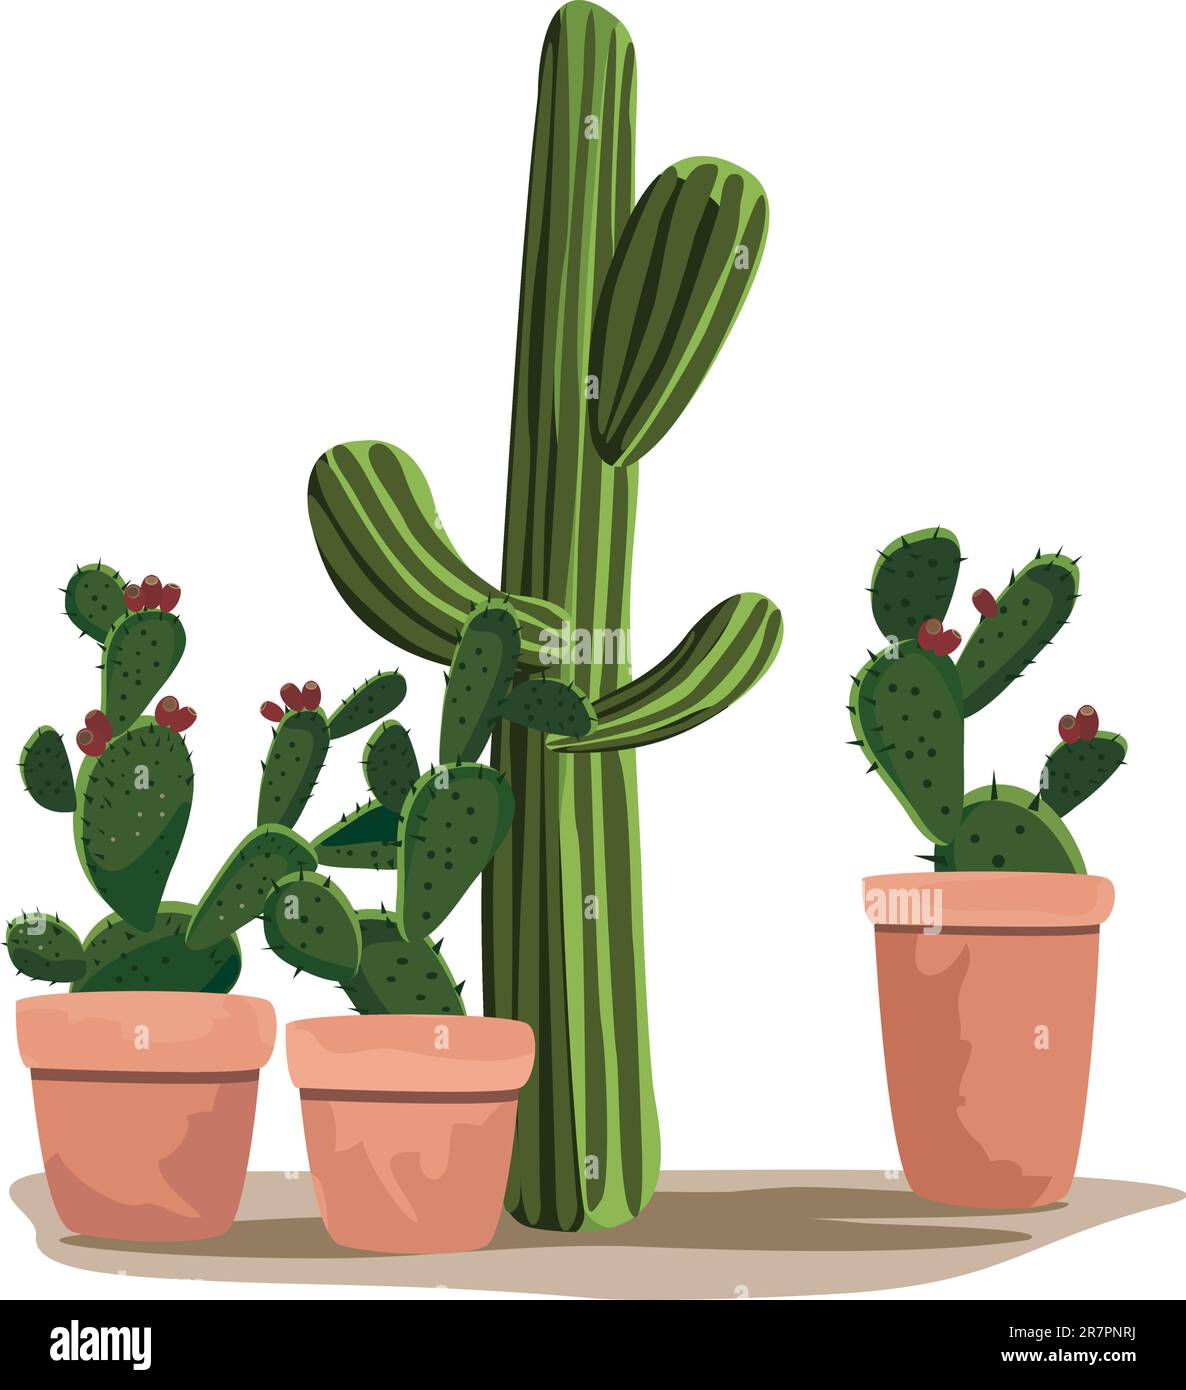 Illustration of cactus plants in the pots Stock Vector